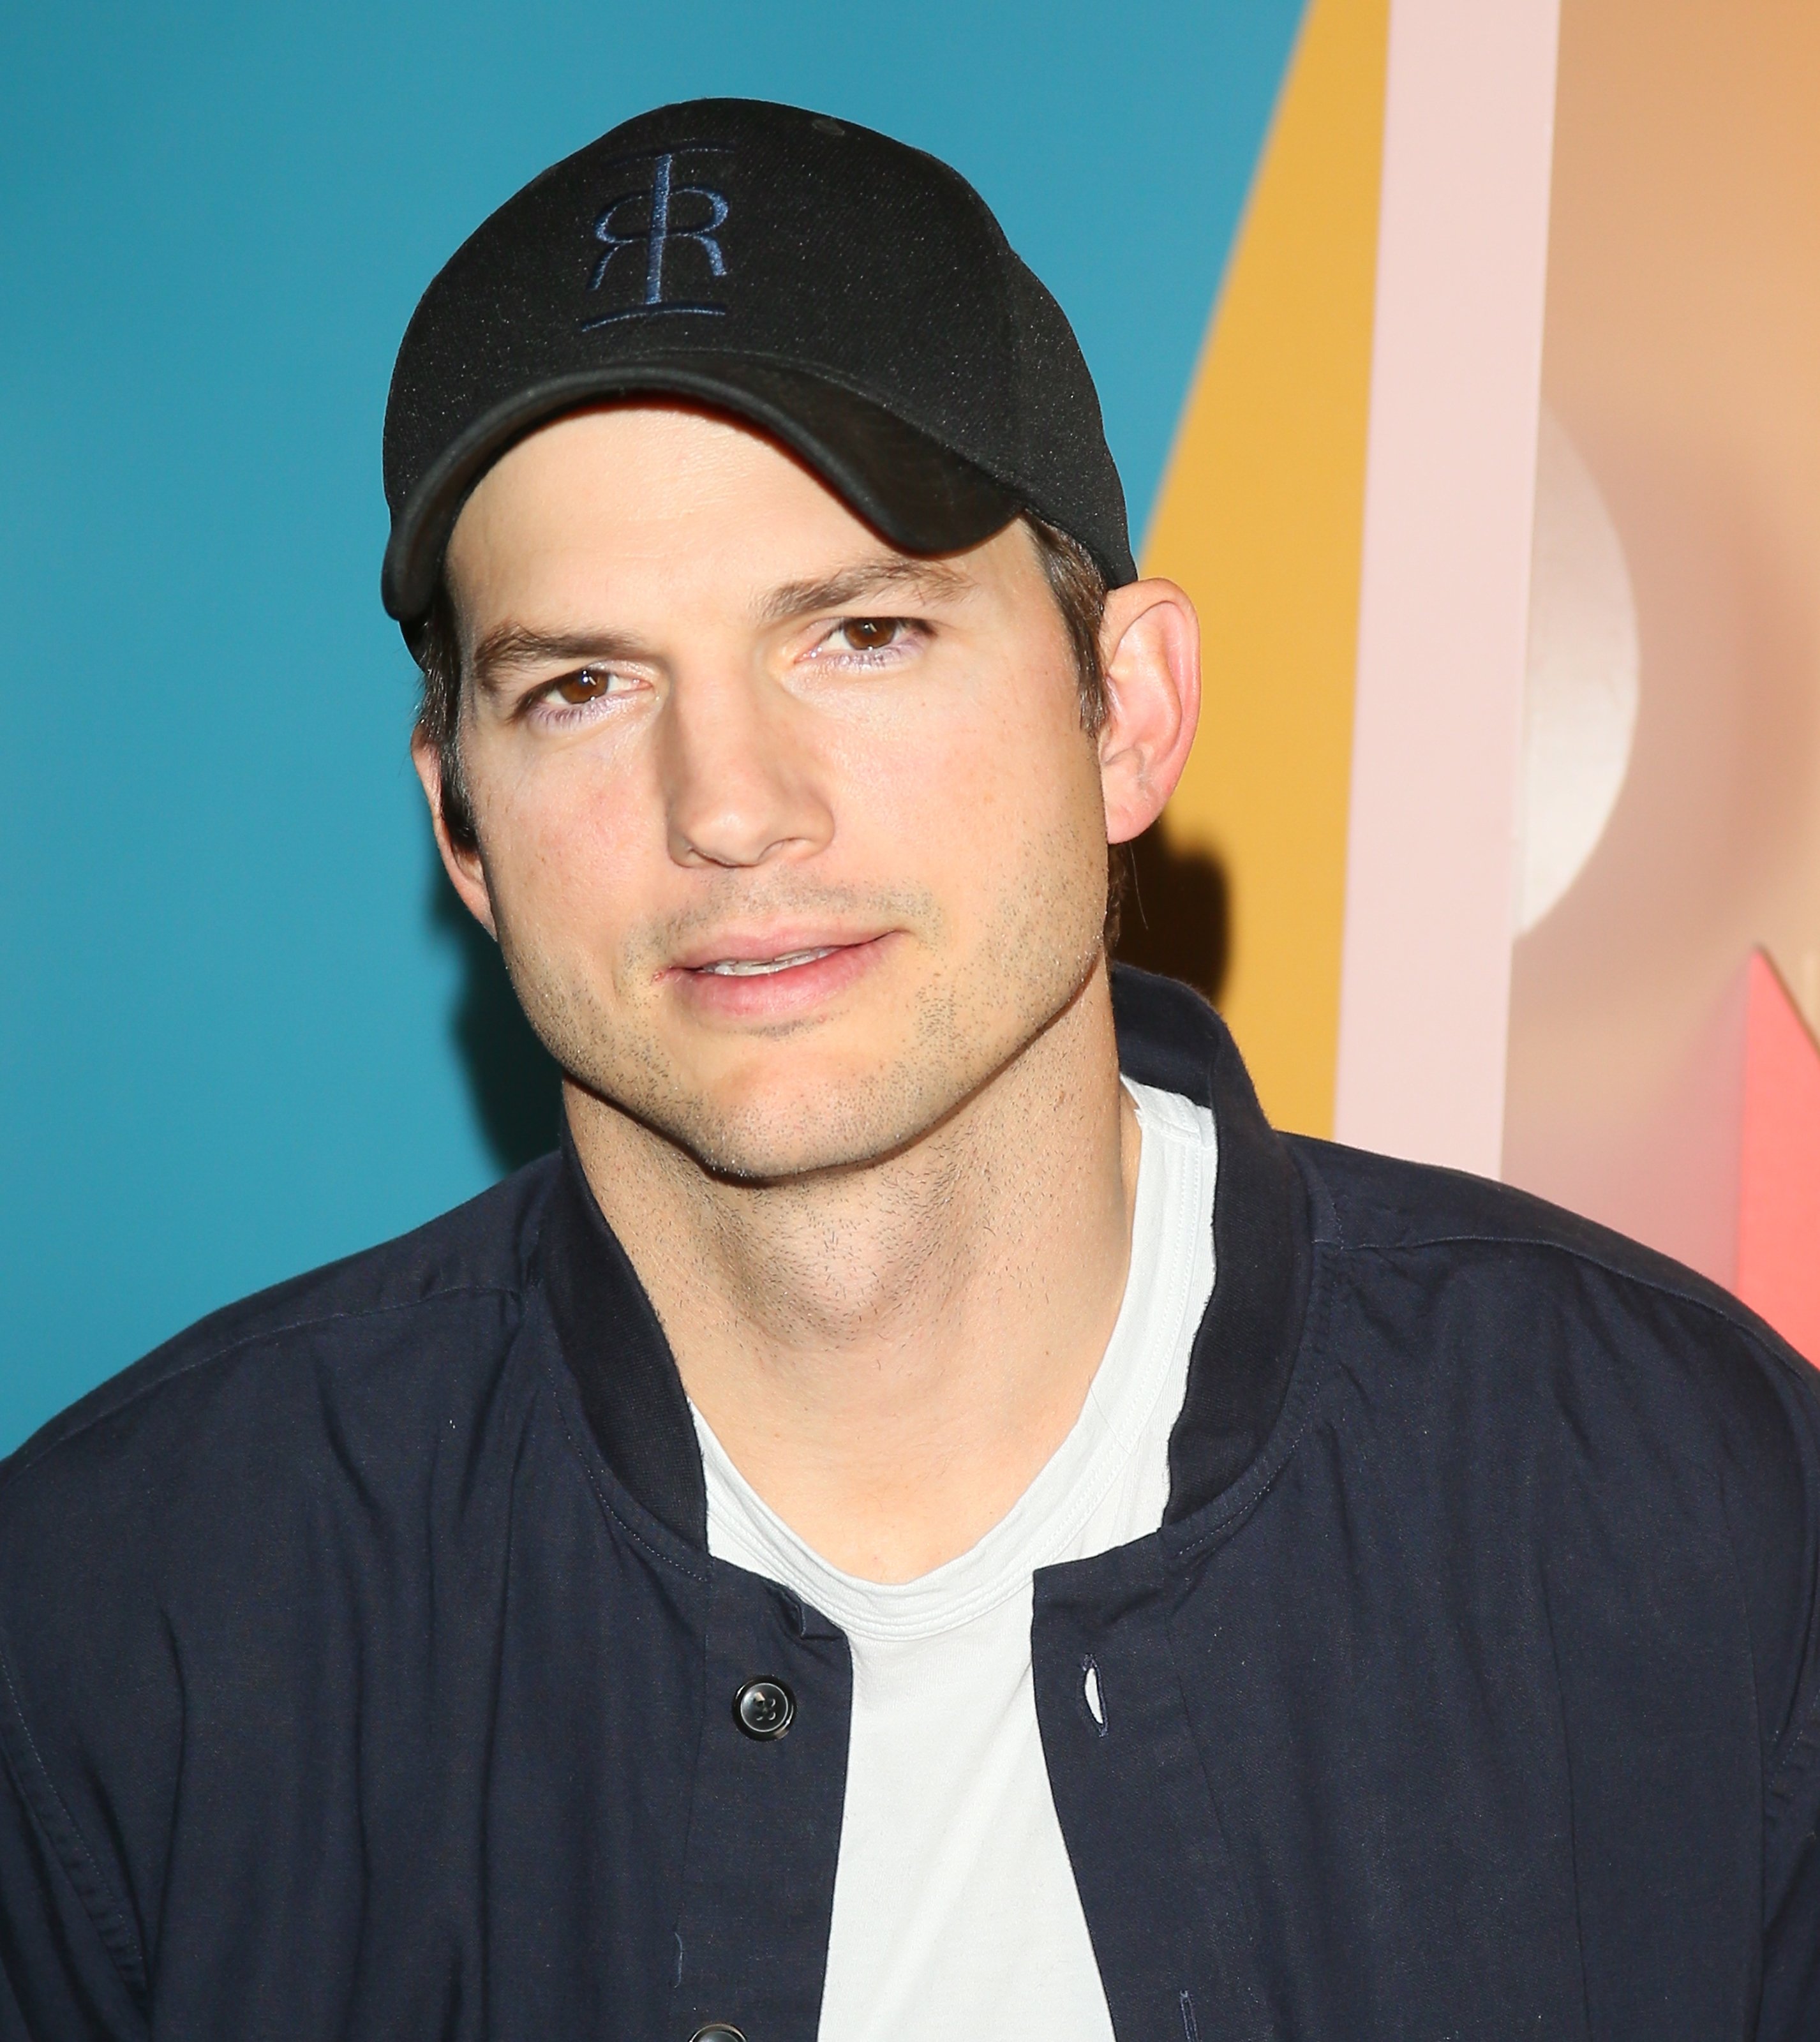 Ashton Kutcher in Los Angeles in 2019 | Source: Getty images